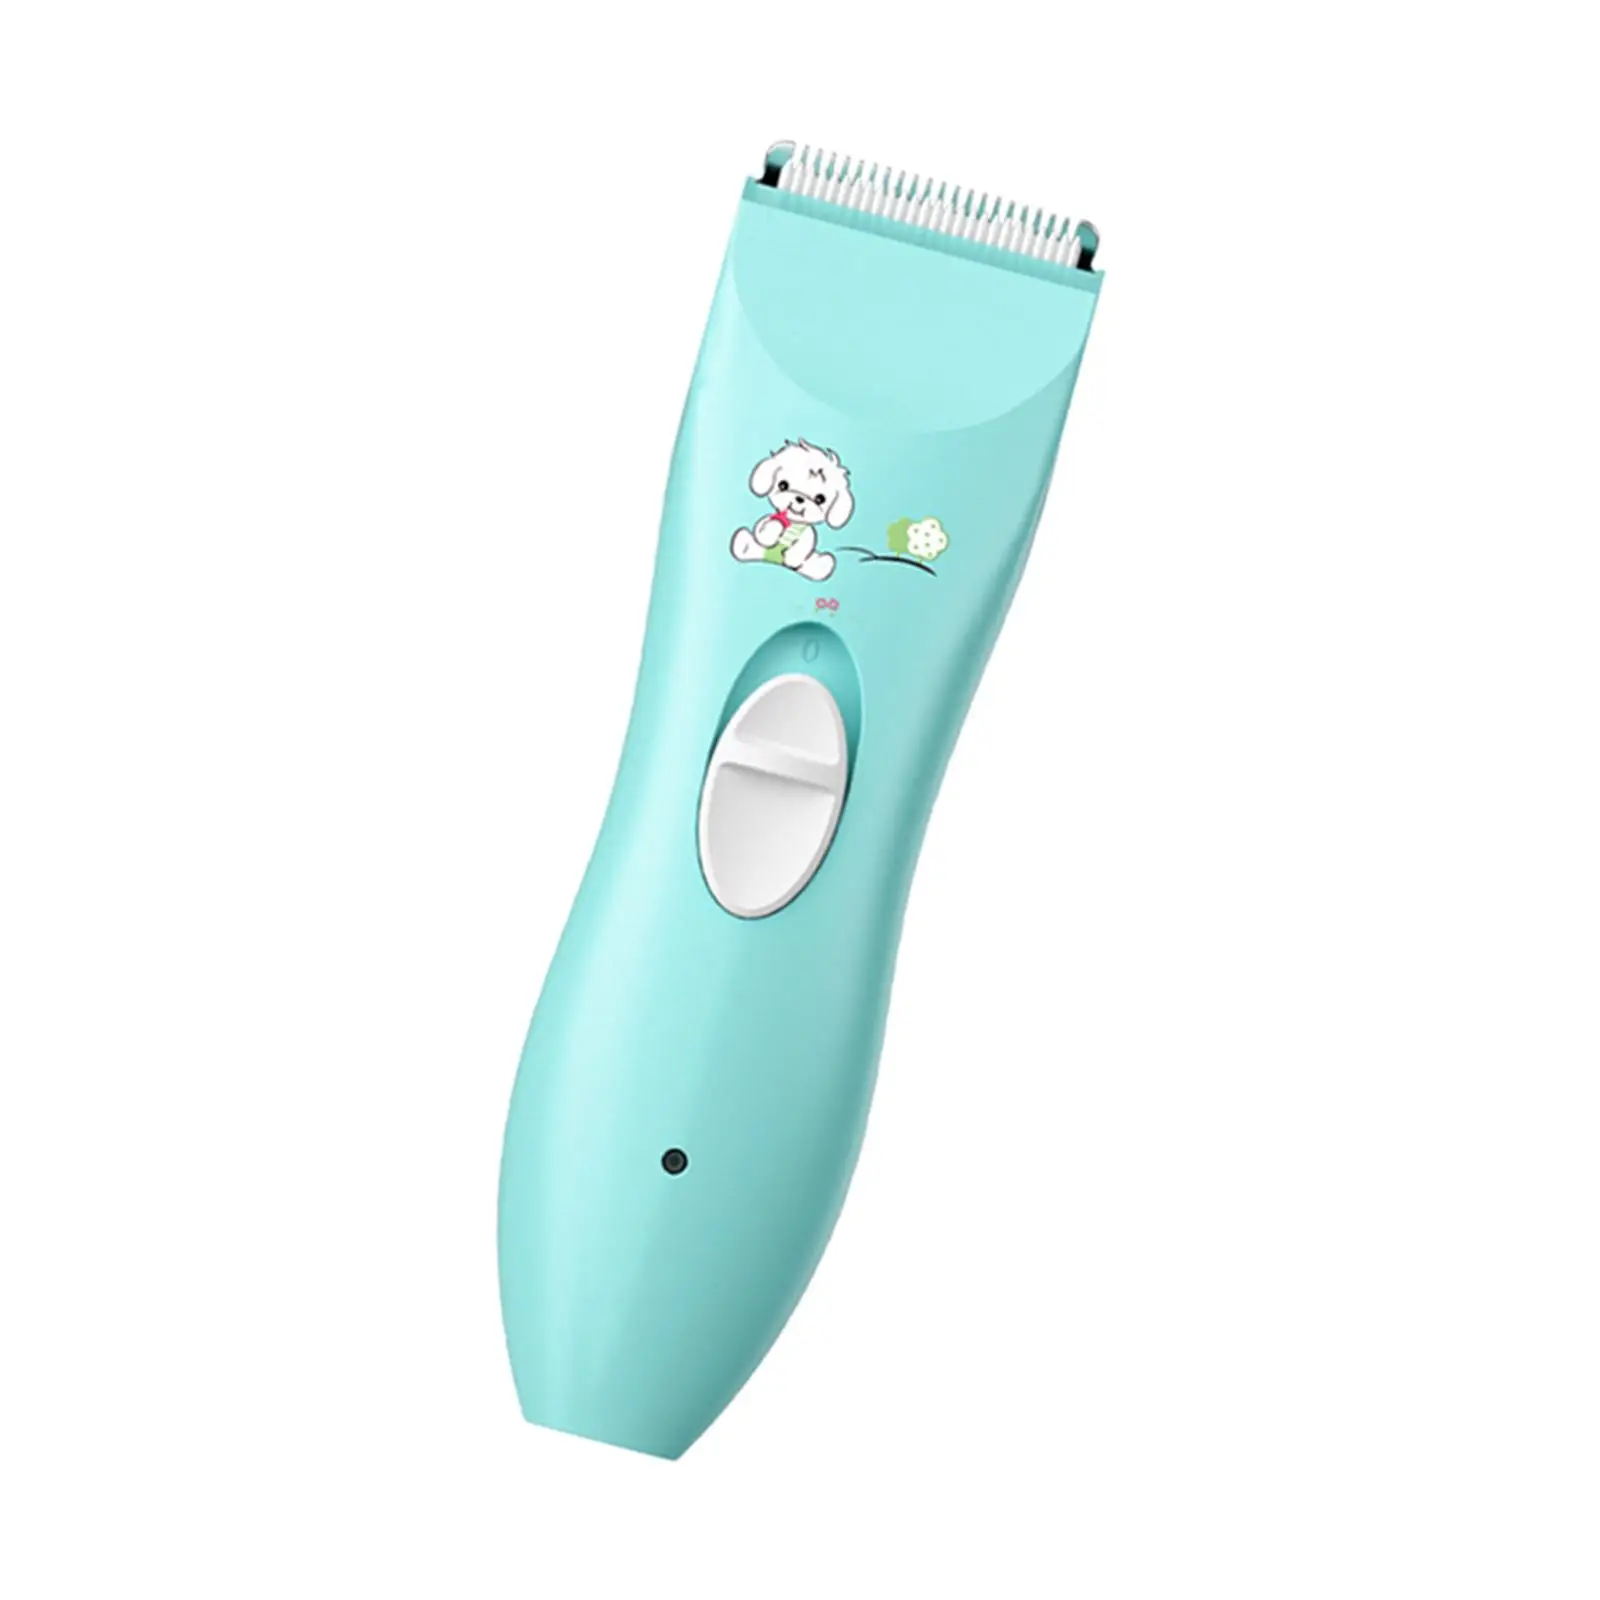  childr Clippers Rechargeable R Round  Unit ,   Delicate Skin Against Scratches and Cuts Comfortable Haircut